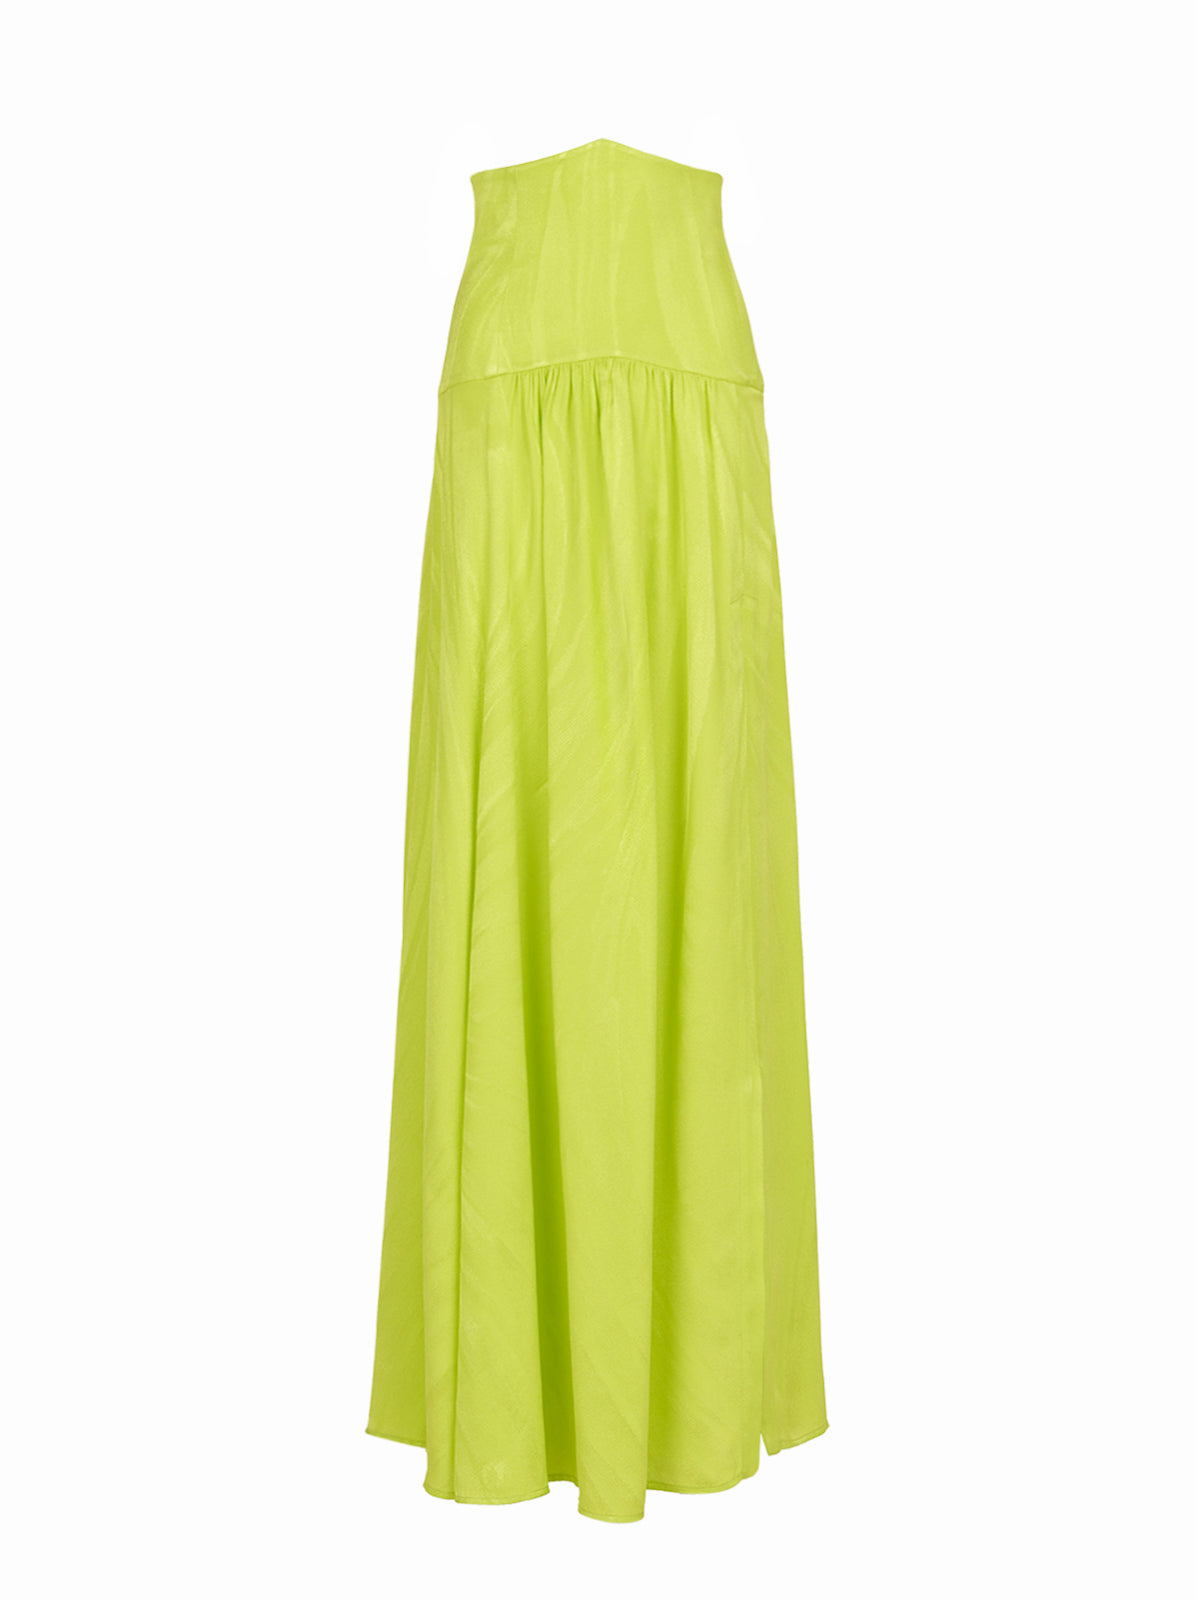 A Febe Skirt Verde Lime with a high fashion skirt, displayed against a white background.